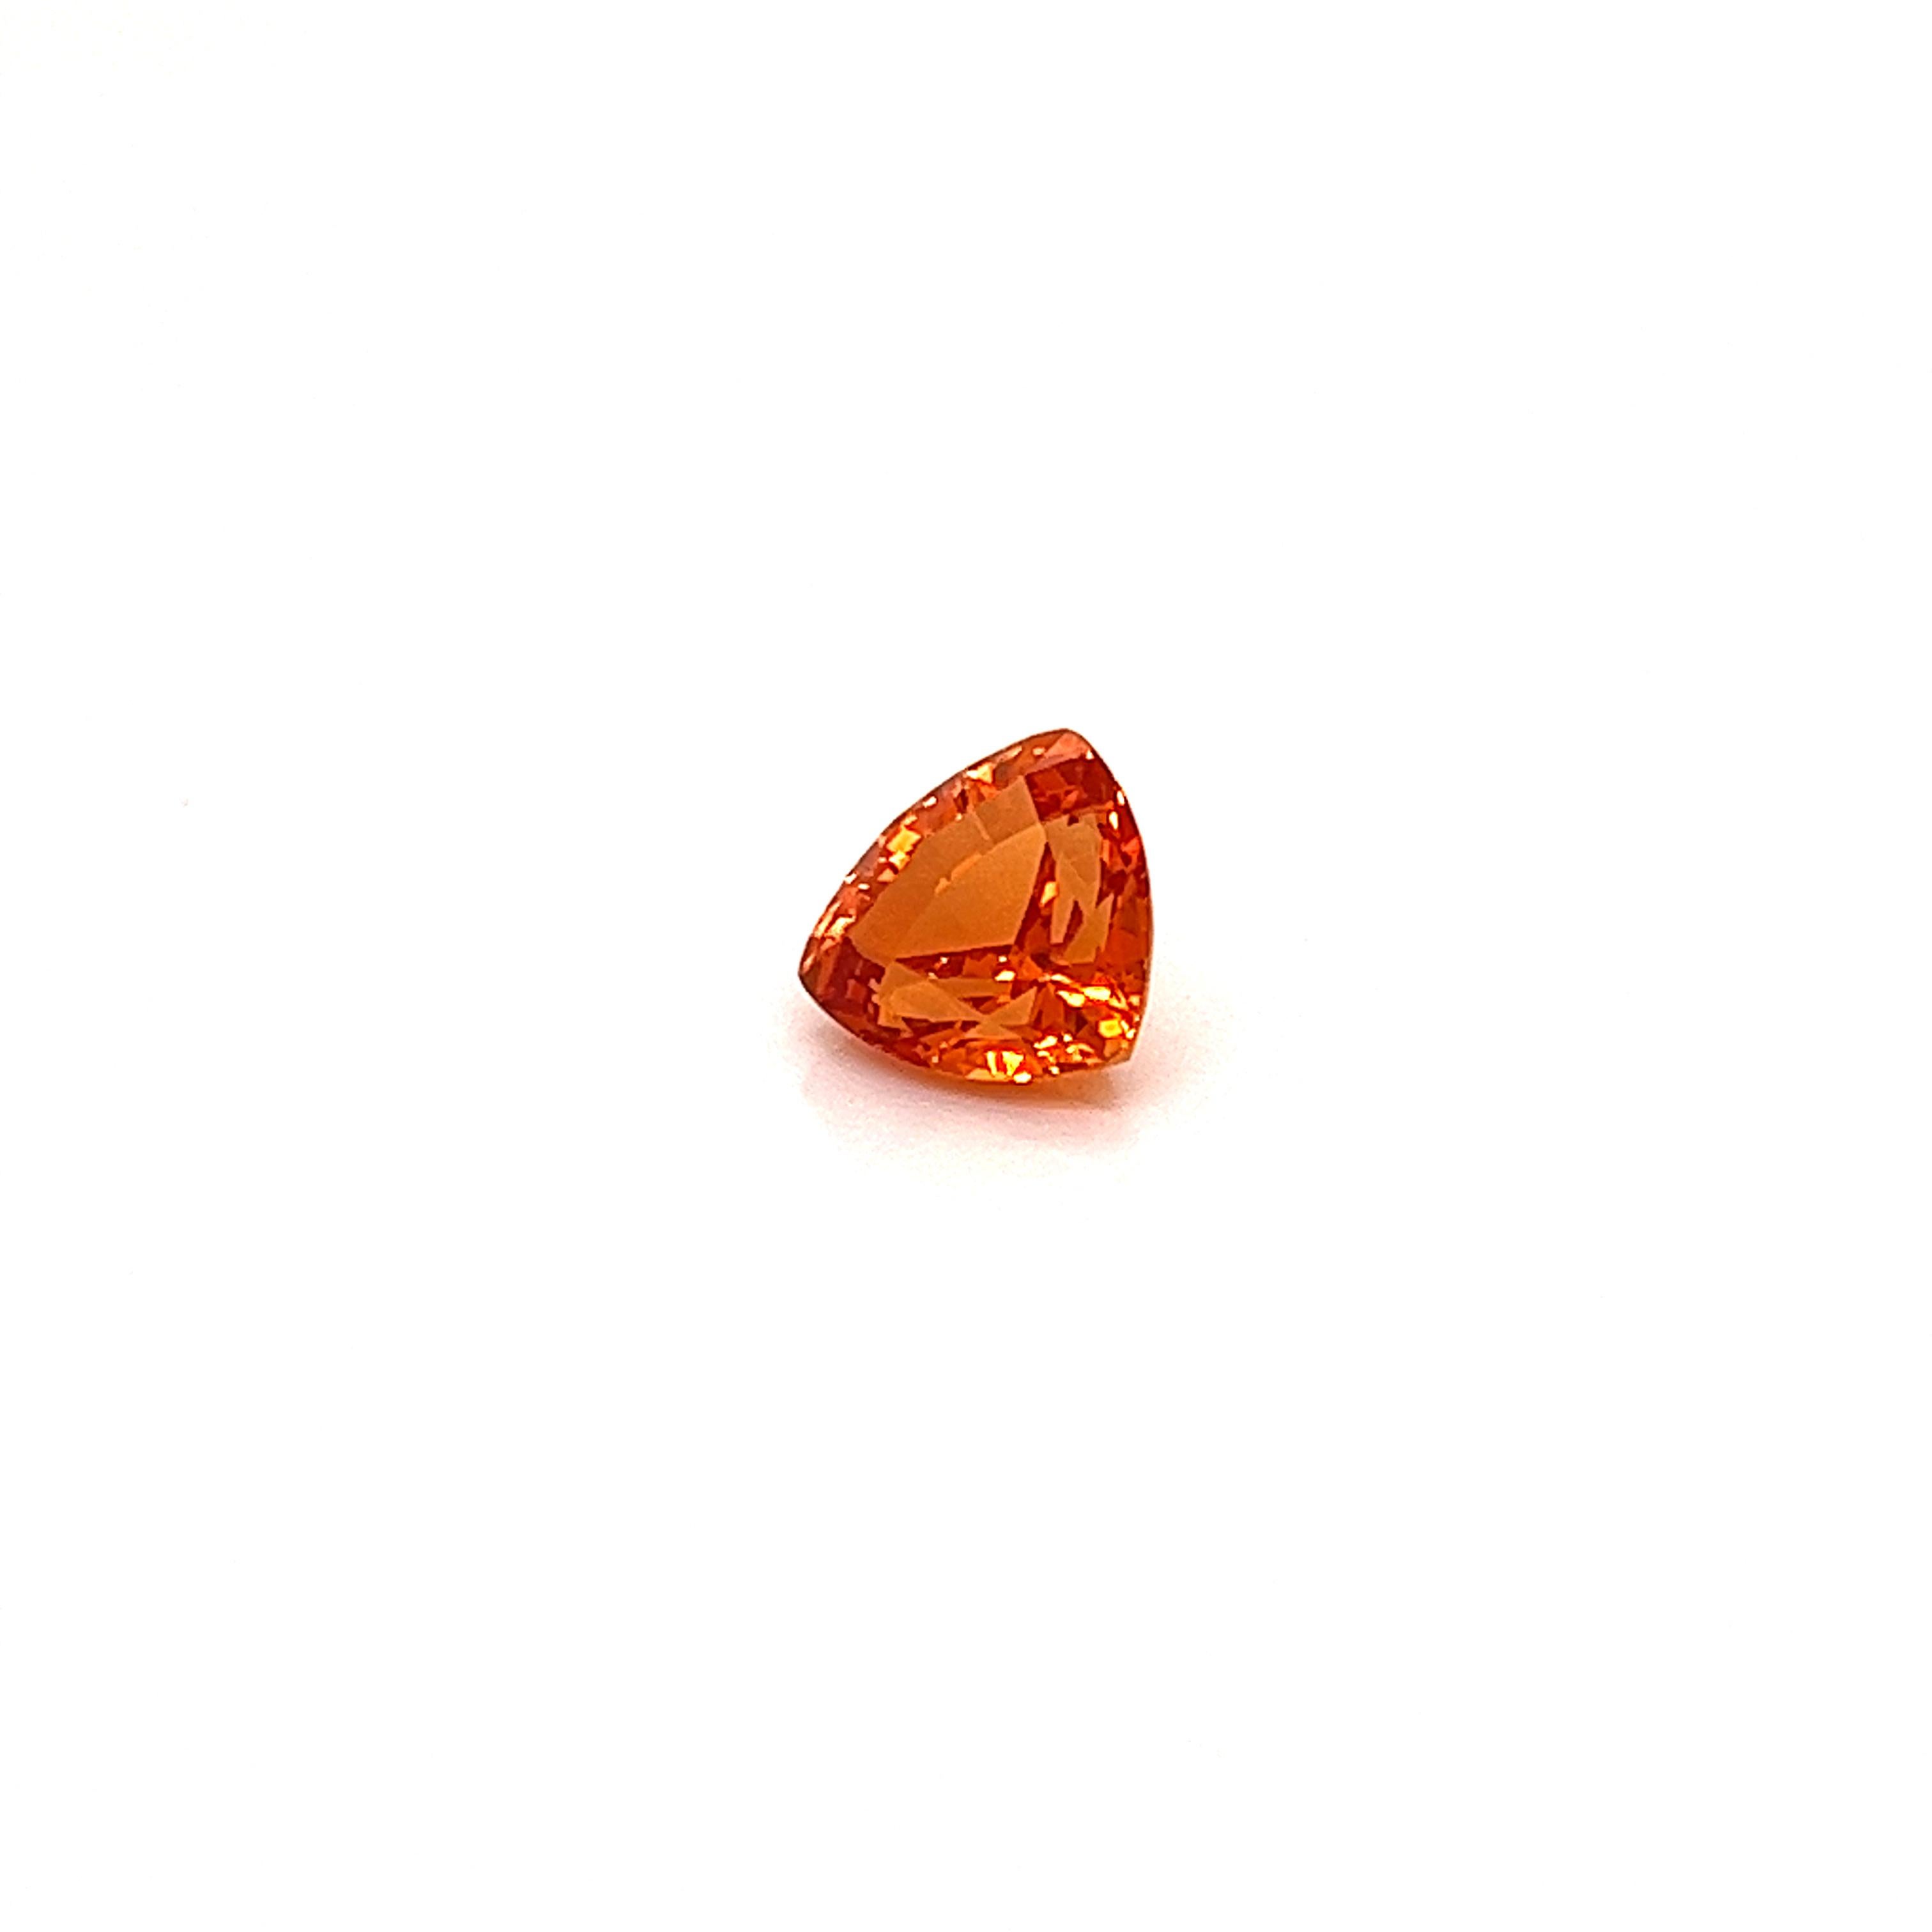 Spessartite garnet Trilliant cut stone weighing a total of  3.17 Carats, offered loose to create an unique design or a top piece for a garnet collector.

Dimension : 8.70 x 8.50

This stone is shiny with a vibrant orangy color, clean.

Each stone is